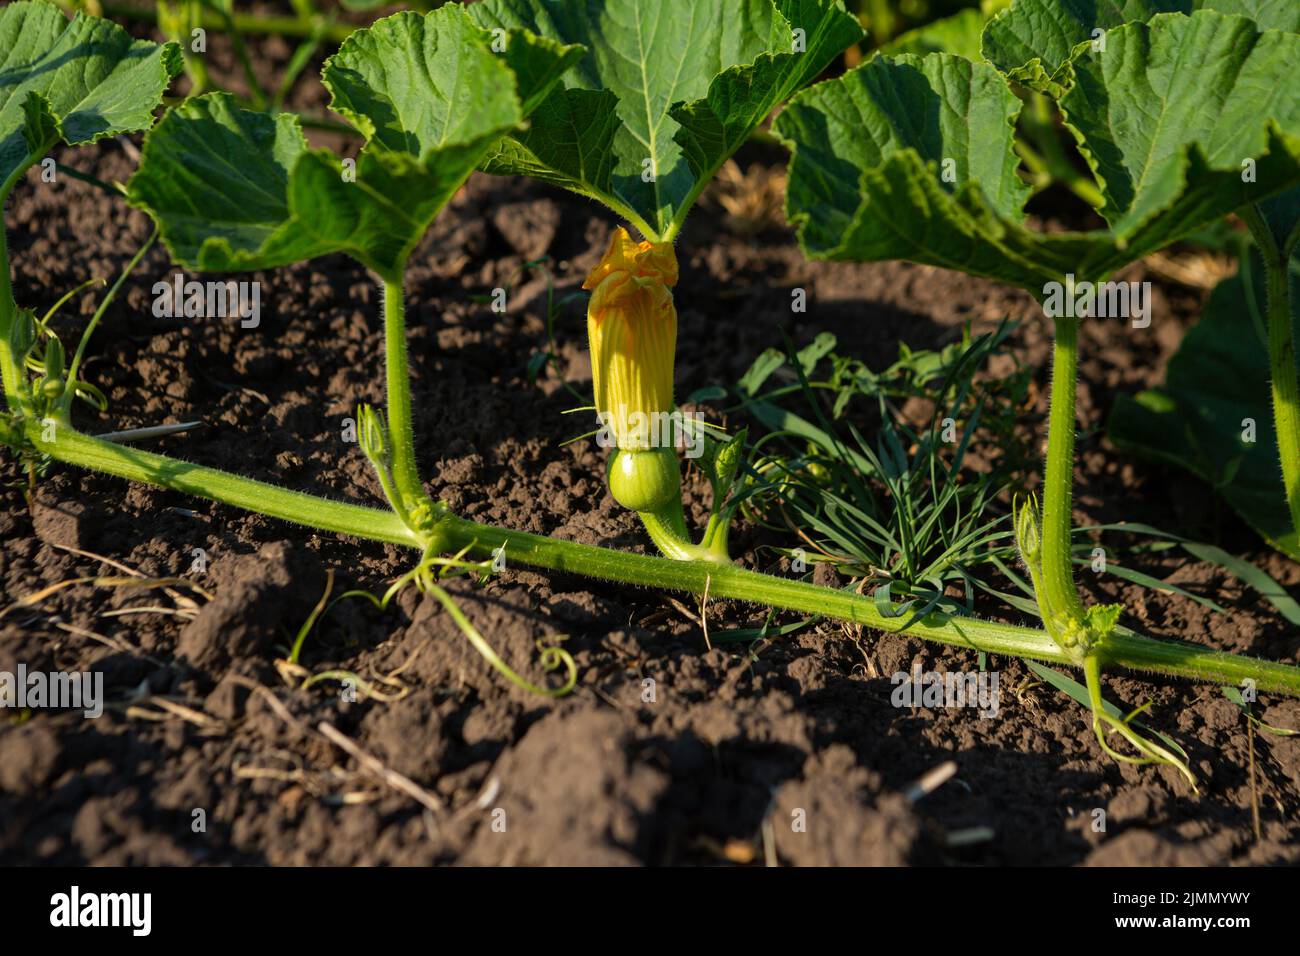 Flower and ovary of pumpkin grows in garden ground Stock Photo